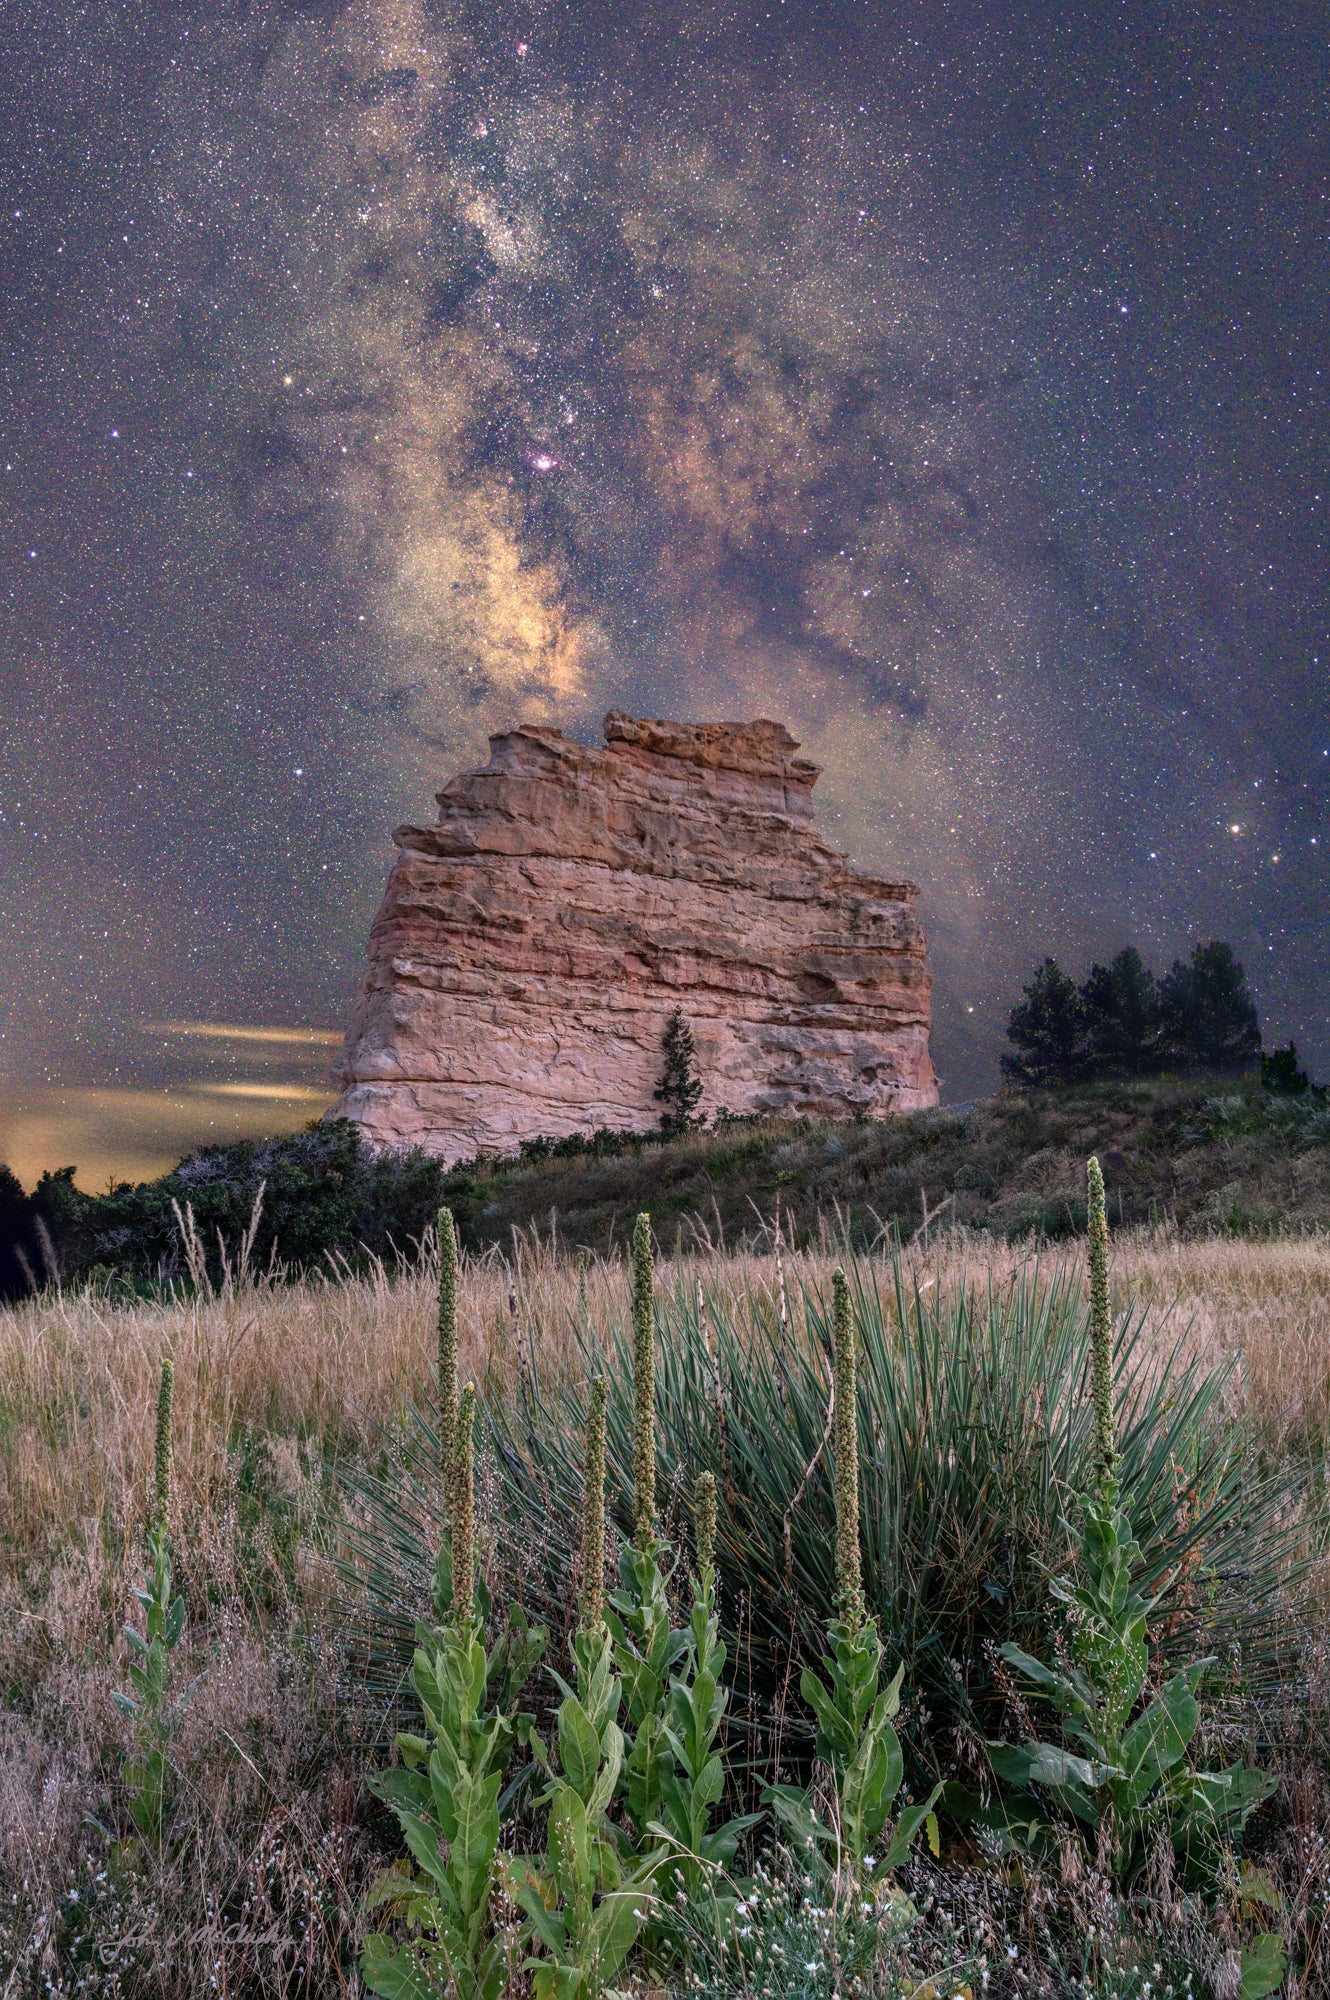 The Milky Way glows over Monument Rock in Monument Colorado, with prairie plants in the foreground